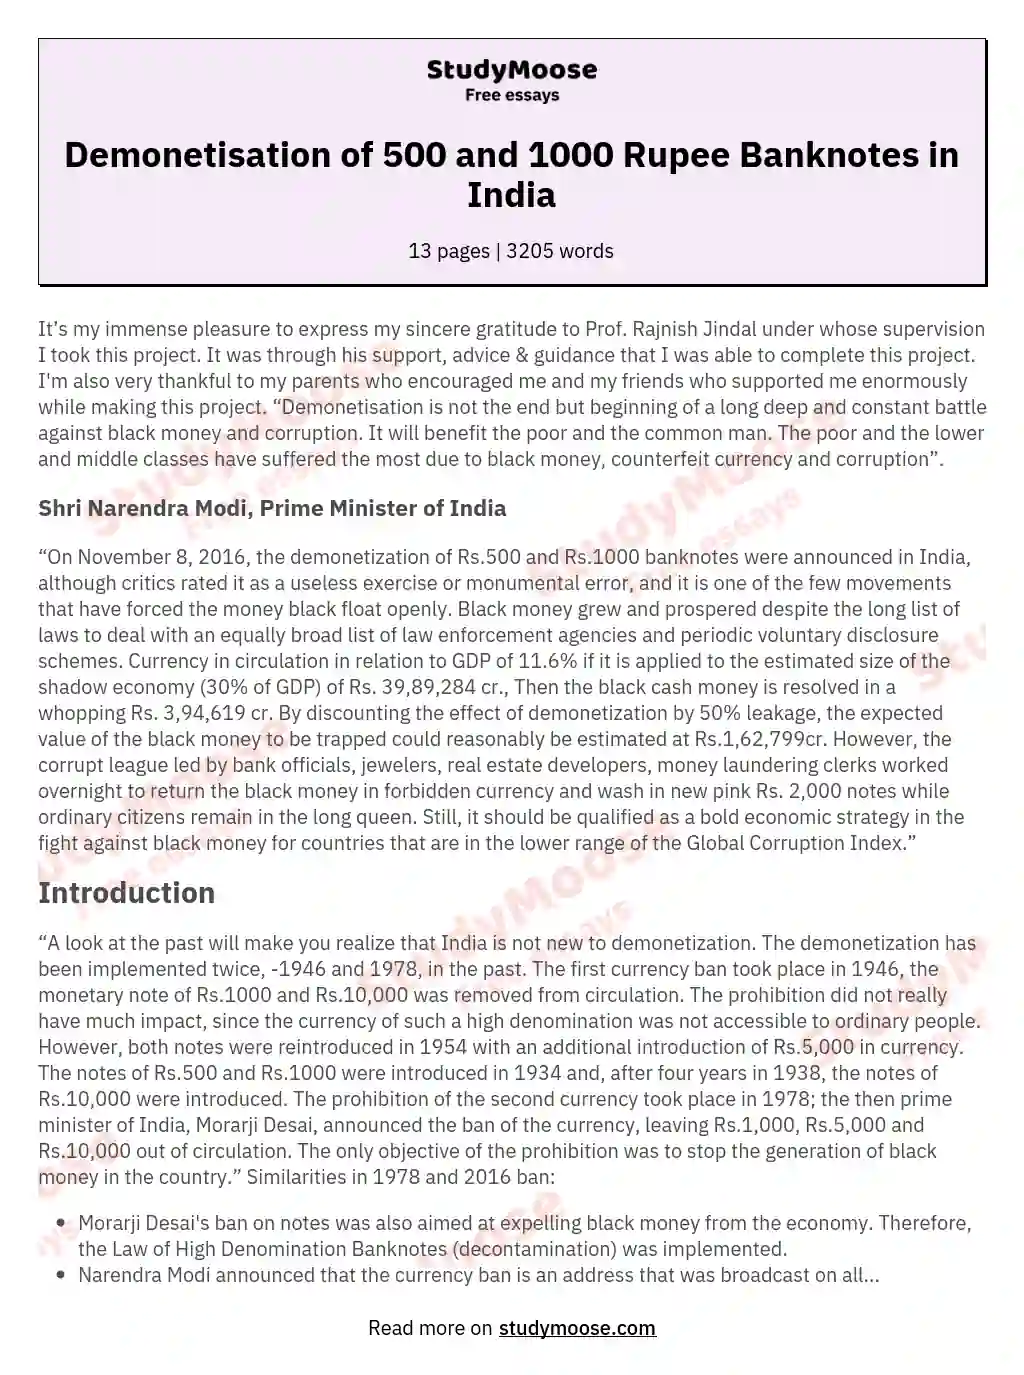 Demonetisation of 500 and 1000 Rupee Banknotes in India essay